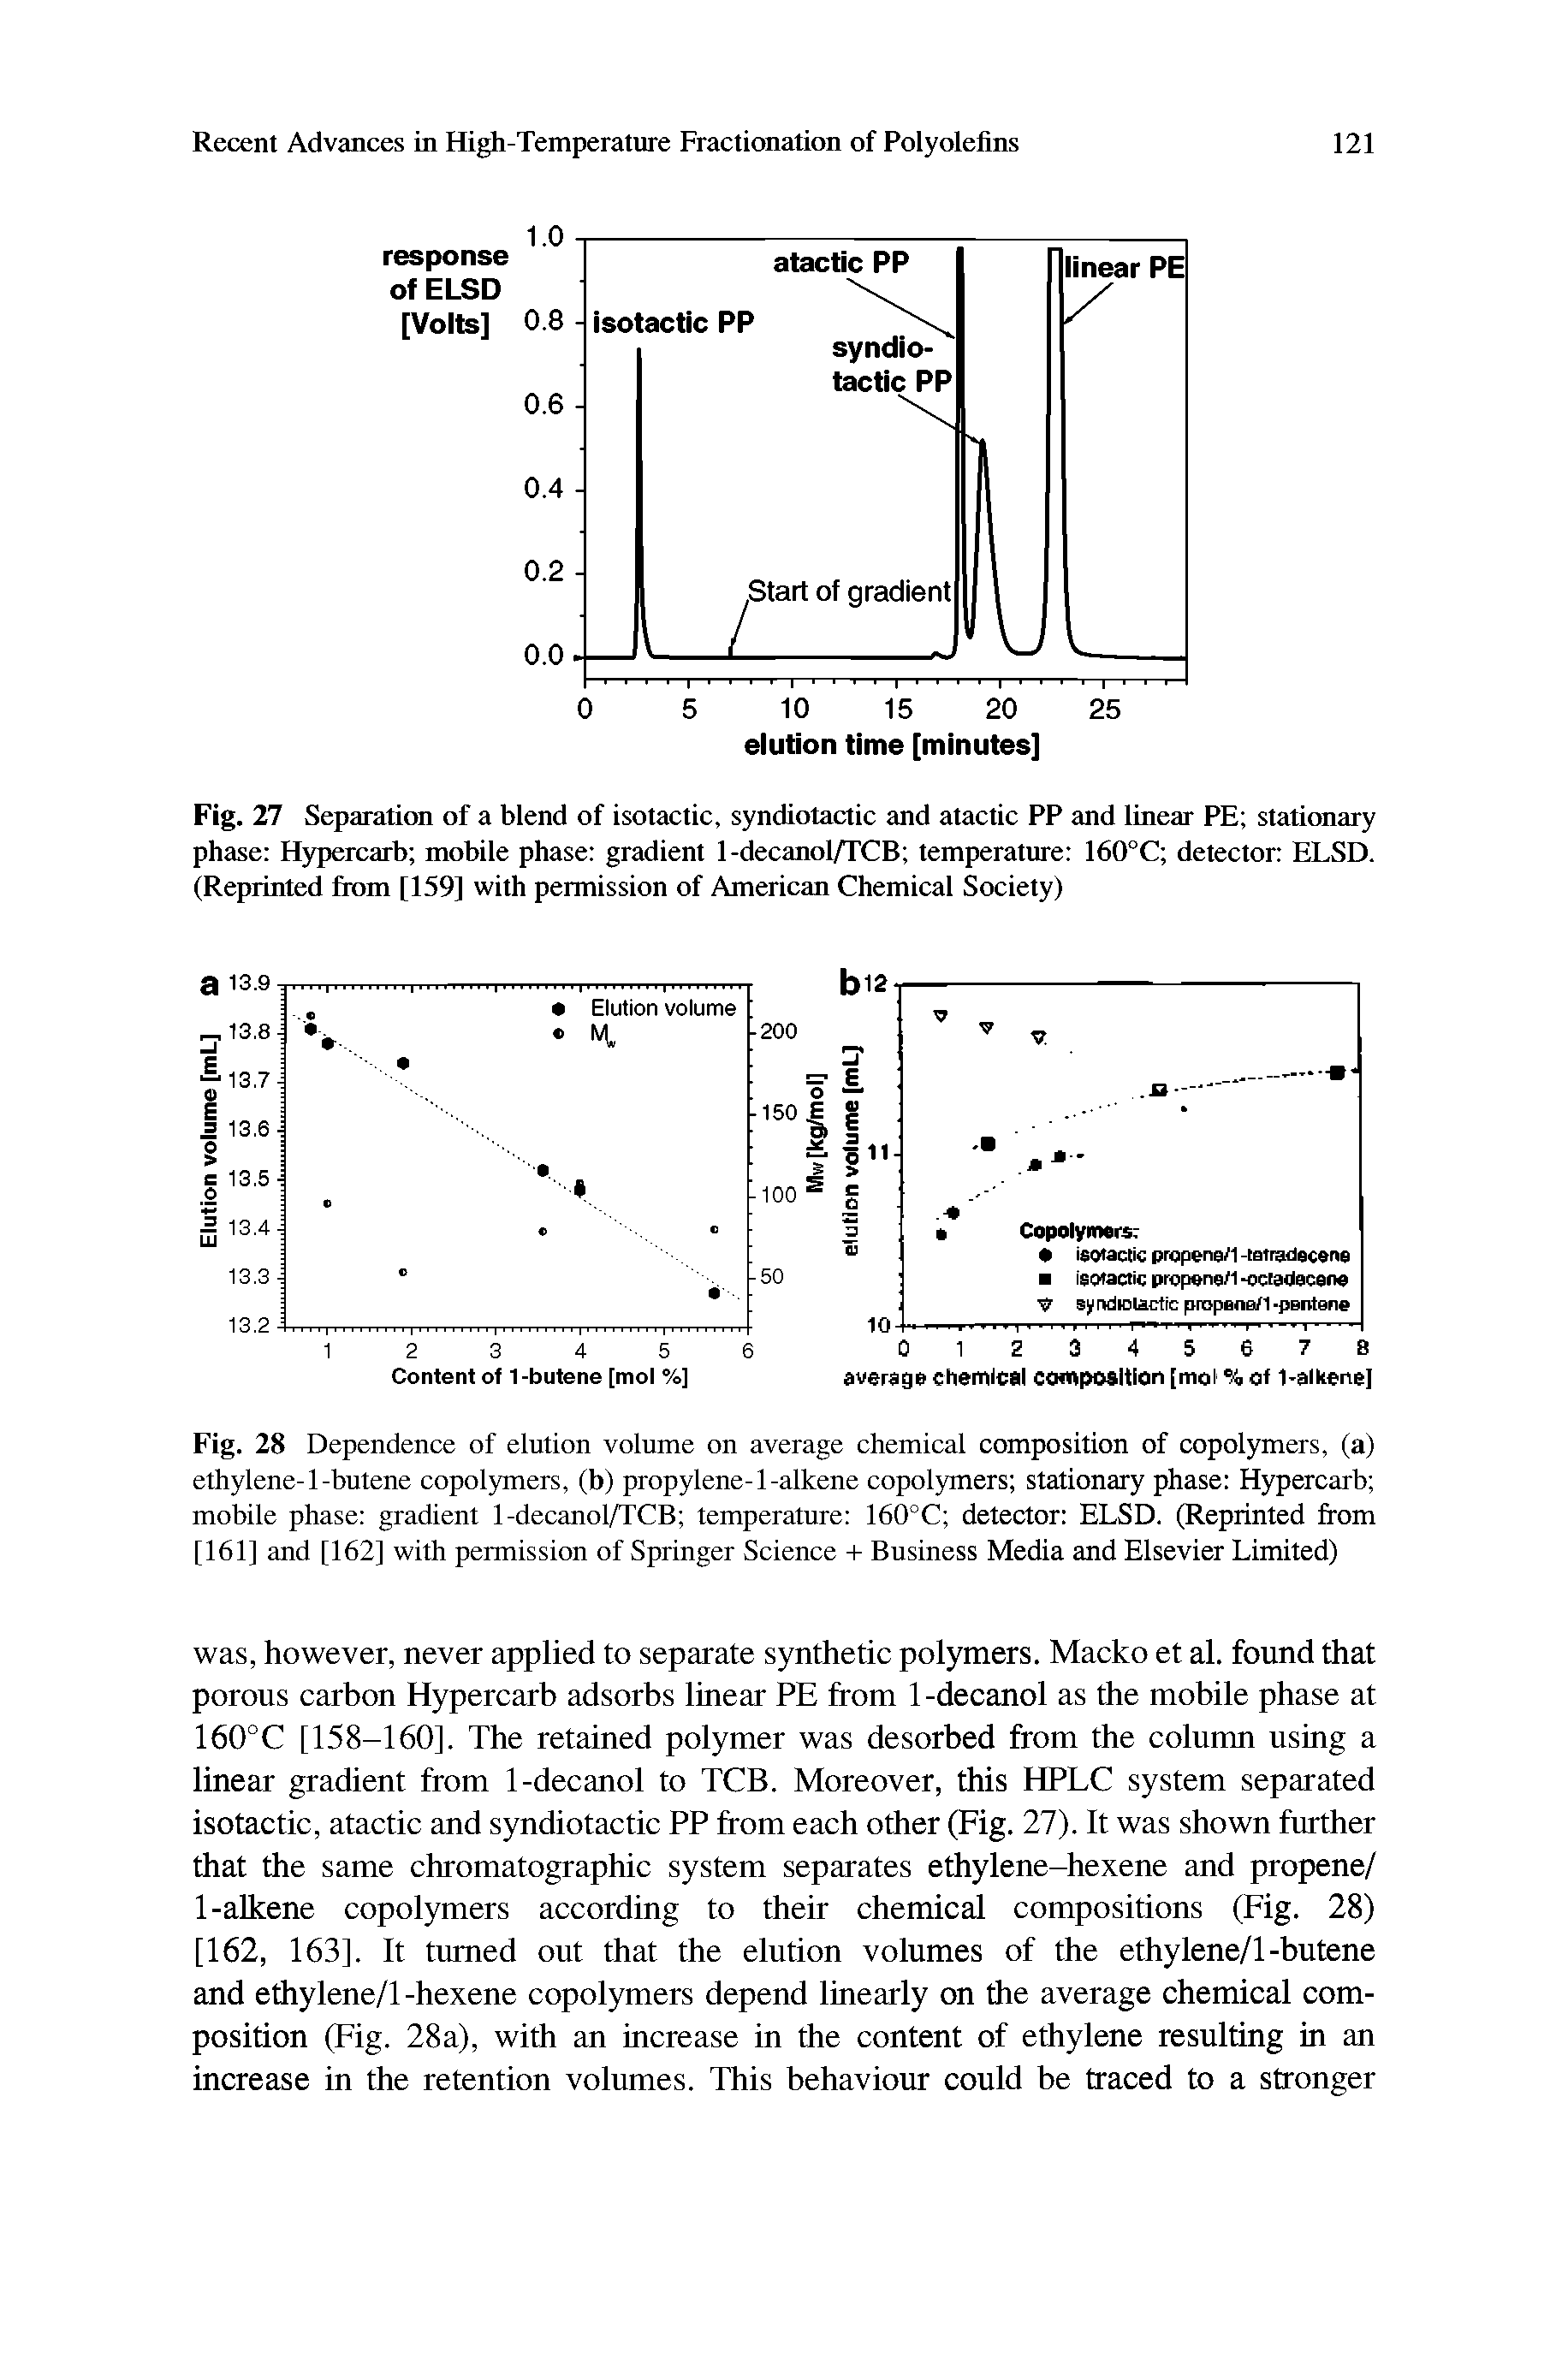 Fig. 27 Separation of a blend of isotactic, syndiotactic and atactic PP and linear PE stationary phase Hypercarb mobile phase gradient 1-decanol/TCB temperature 160°C detector ELSD. (Reprinted from [159] with permission of American Chemical Society)...